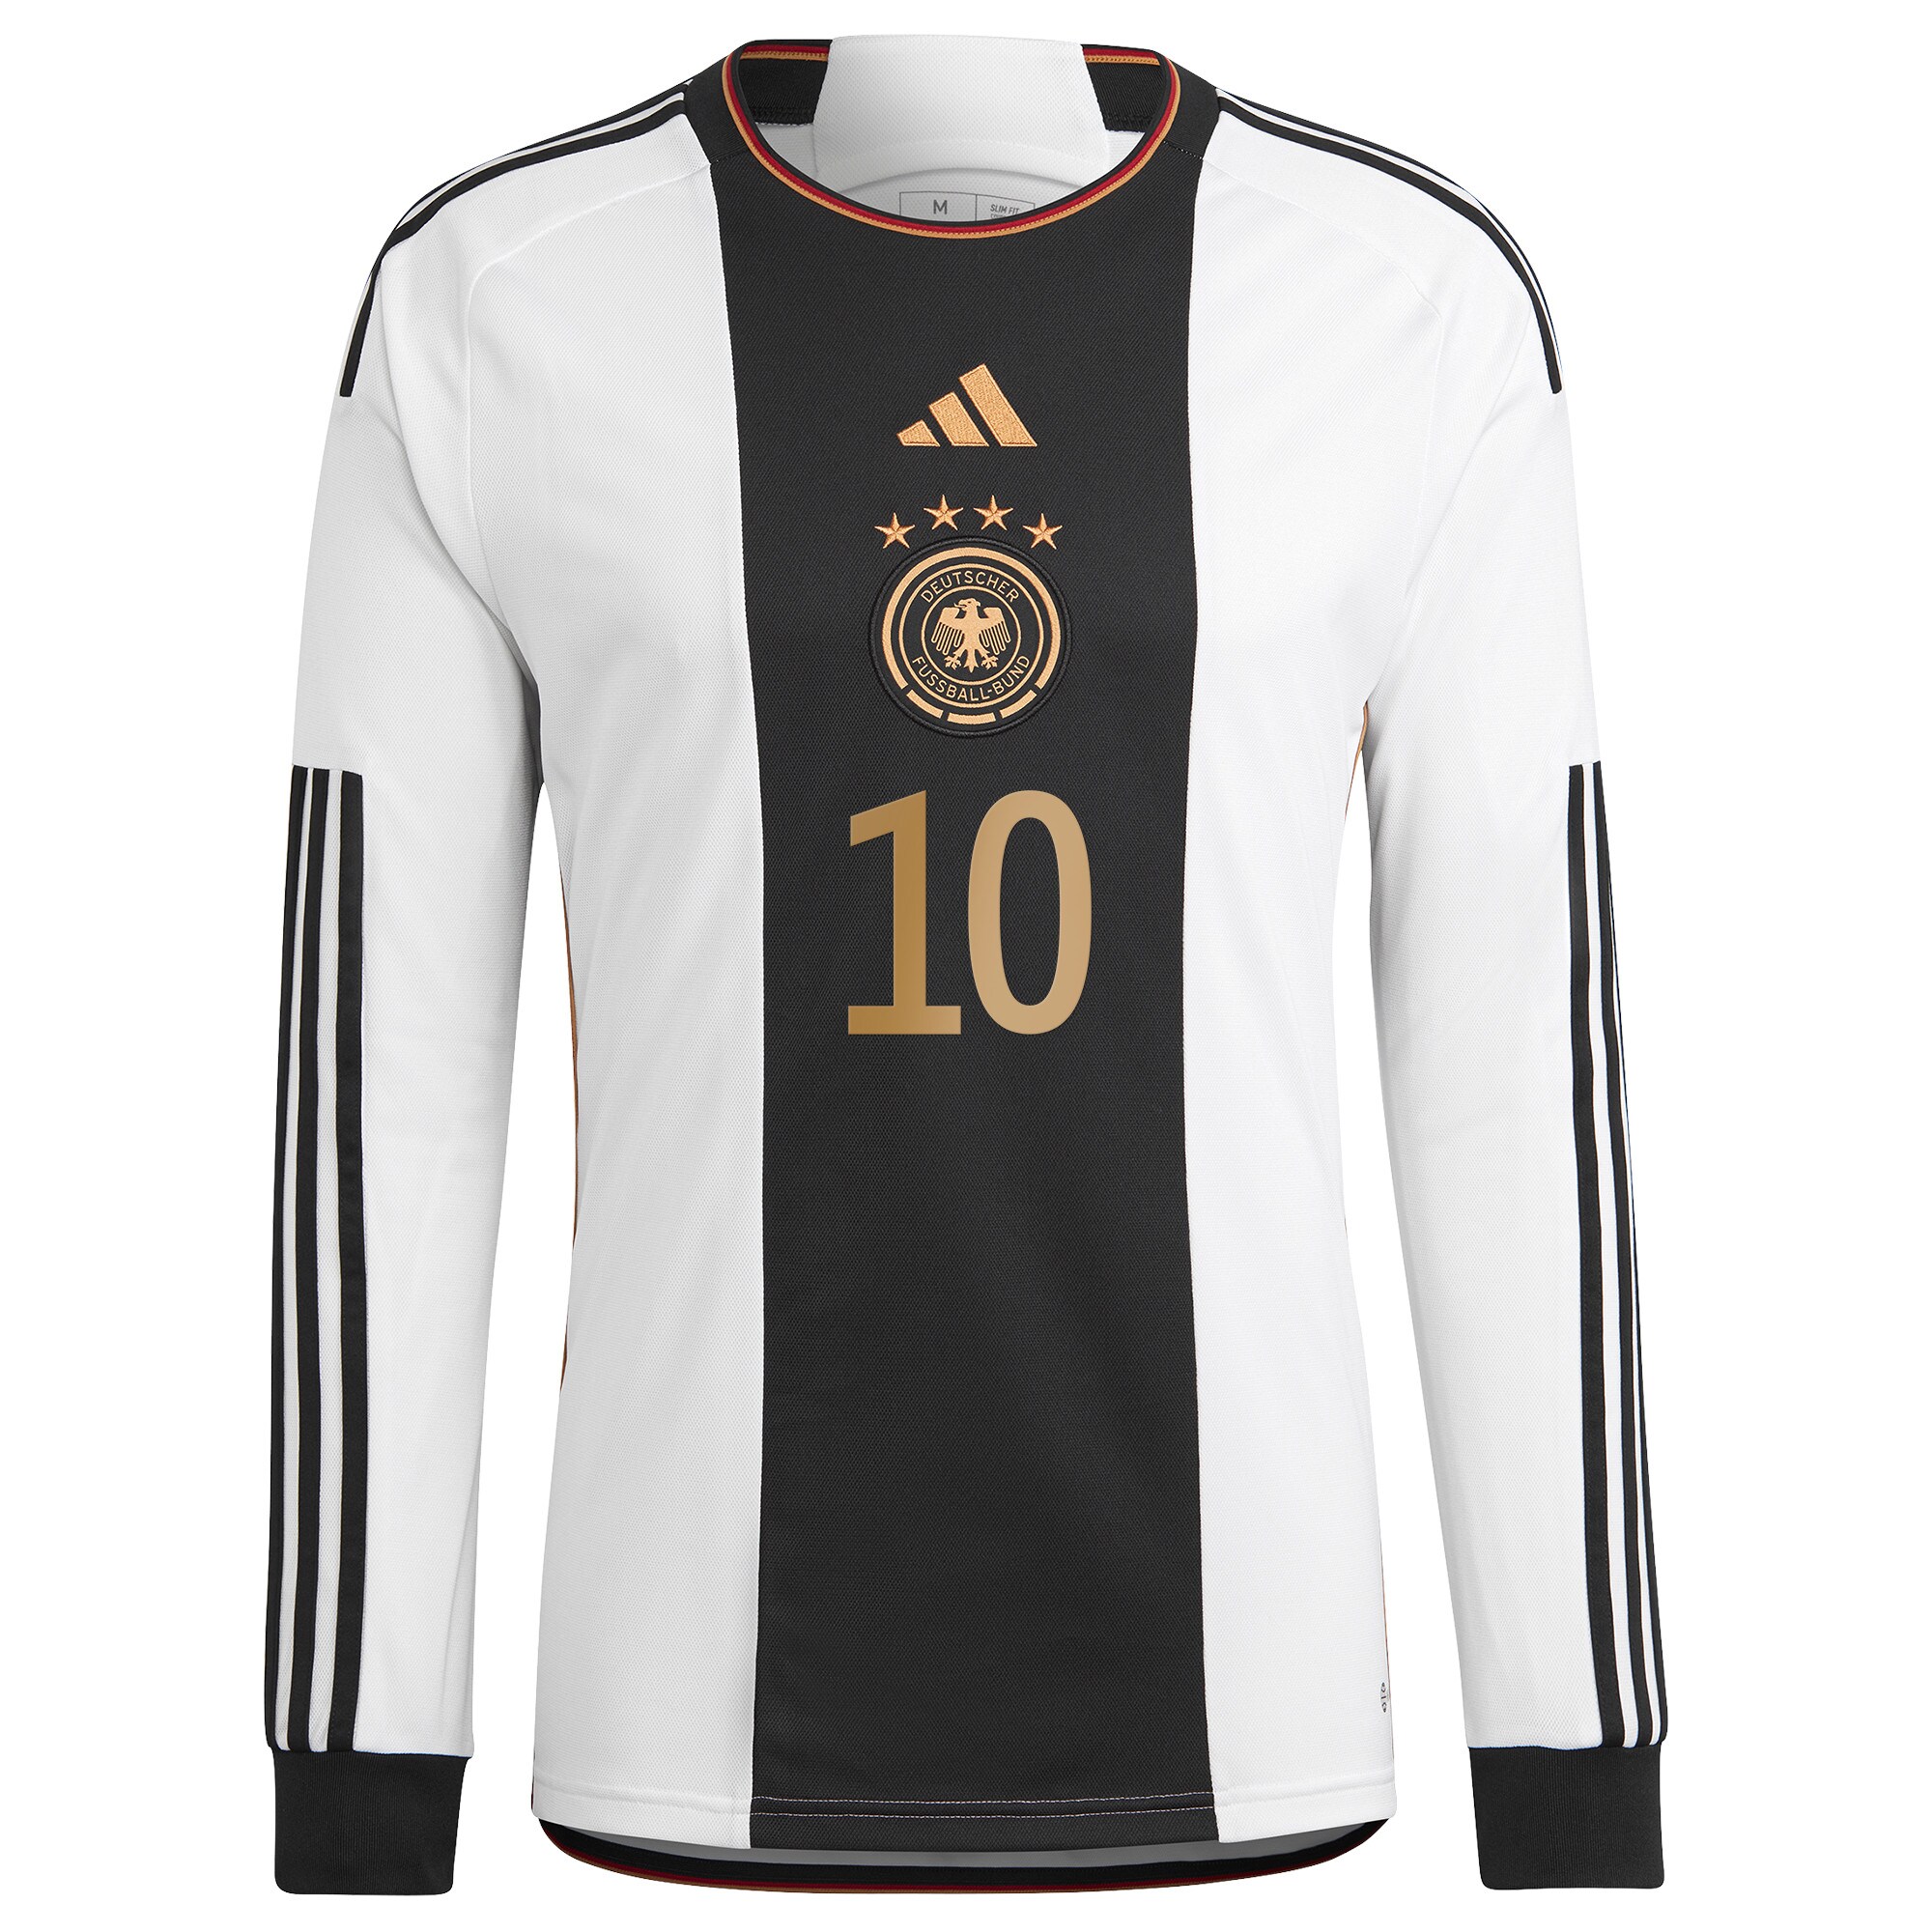 Germany Home Shirt Long Sleeve with Gnabry 10 printing